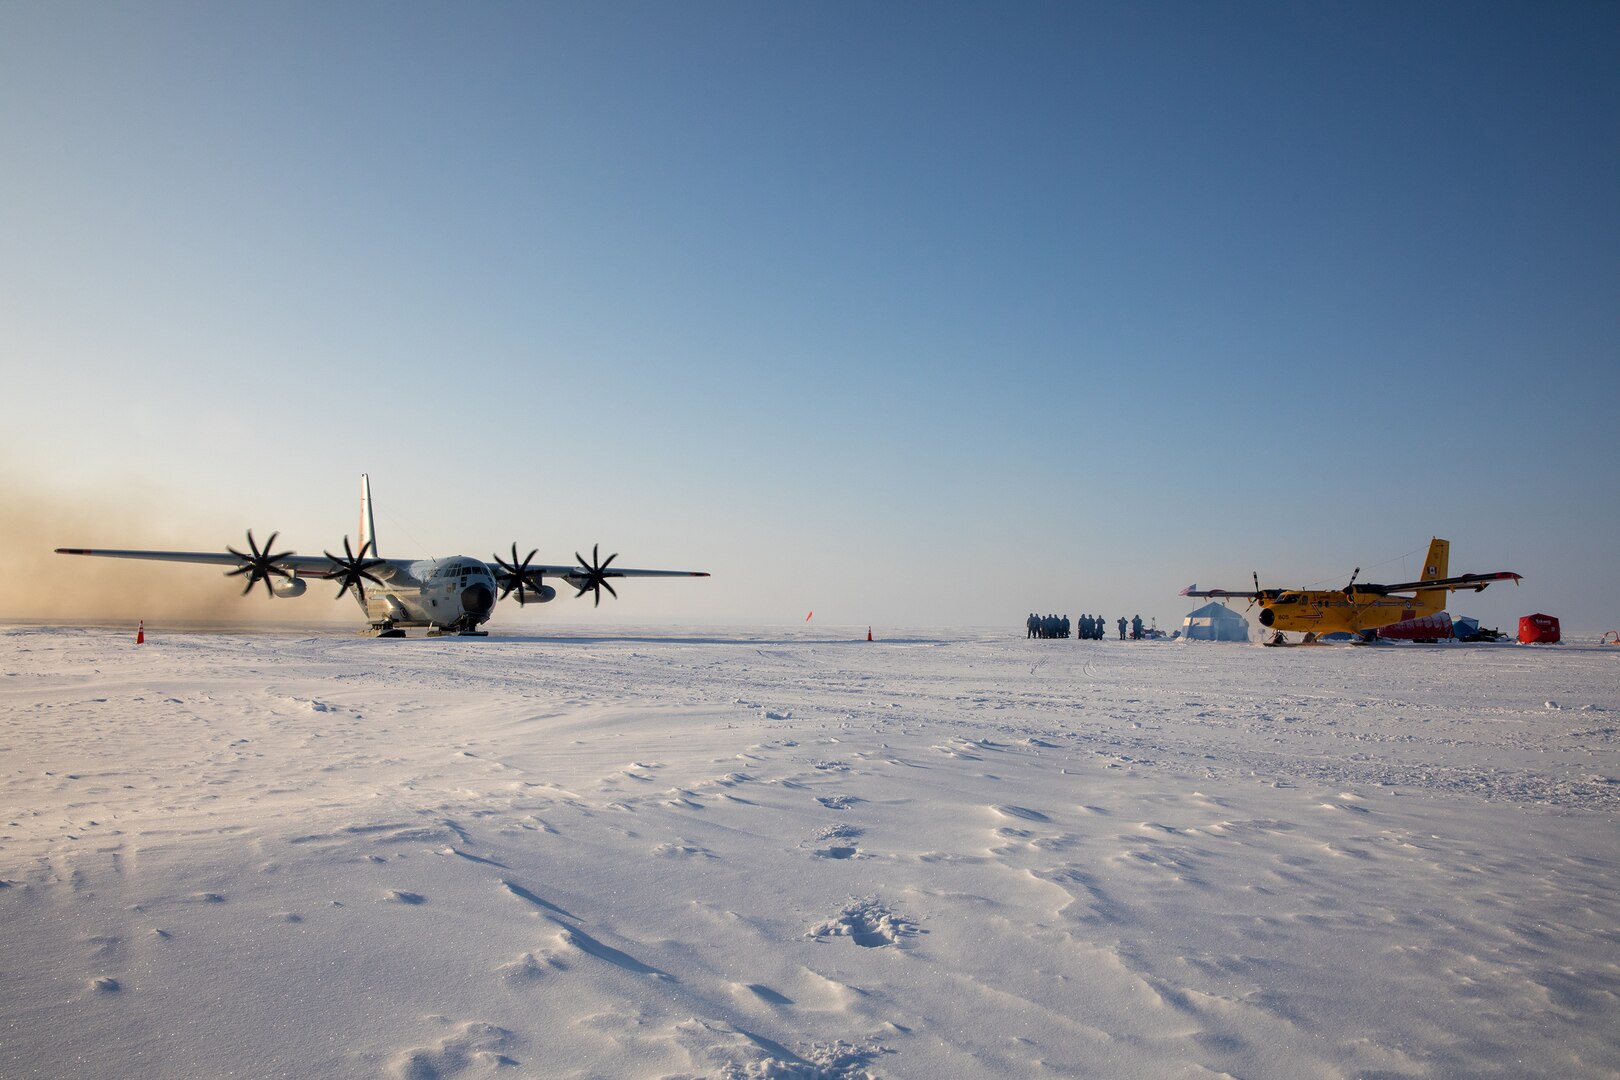 An LC-130 Hercules from the 109th Airlift Wing and a Twin Otter from the Canadian Royal Air Force's 440th Squadron at the remote skiway construction camp during Air National Guard exercise Arctic Eagle, March 1st, 2020.